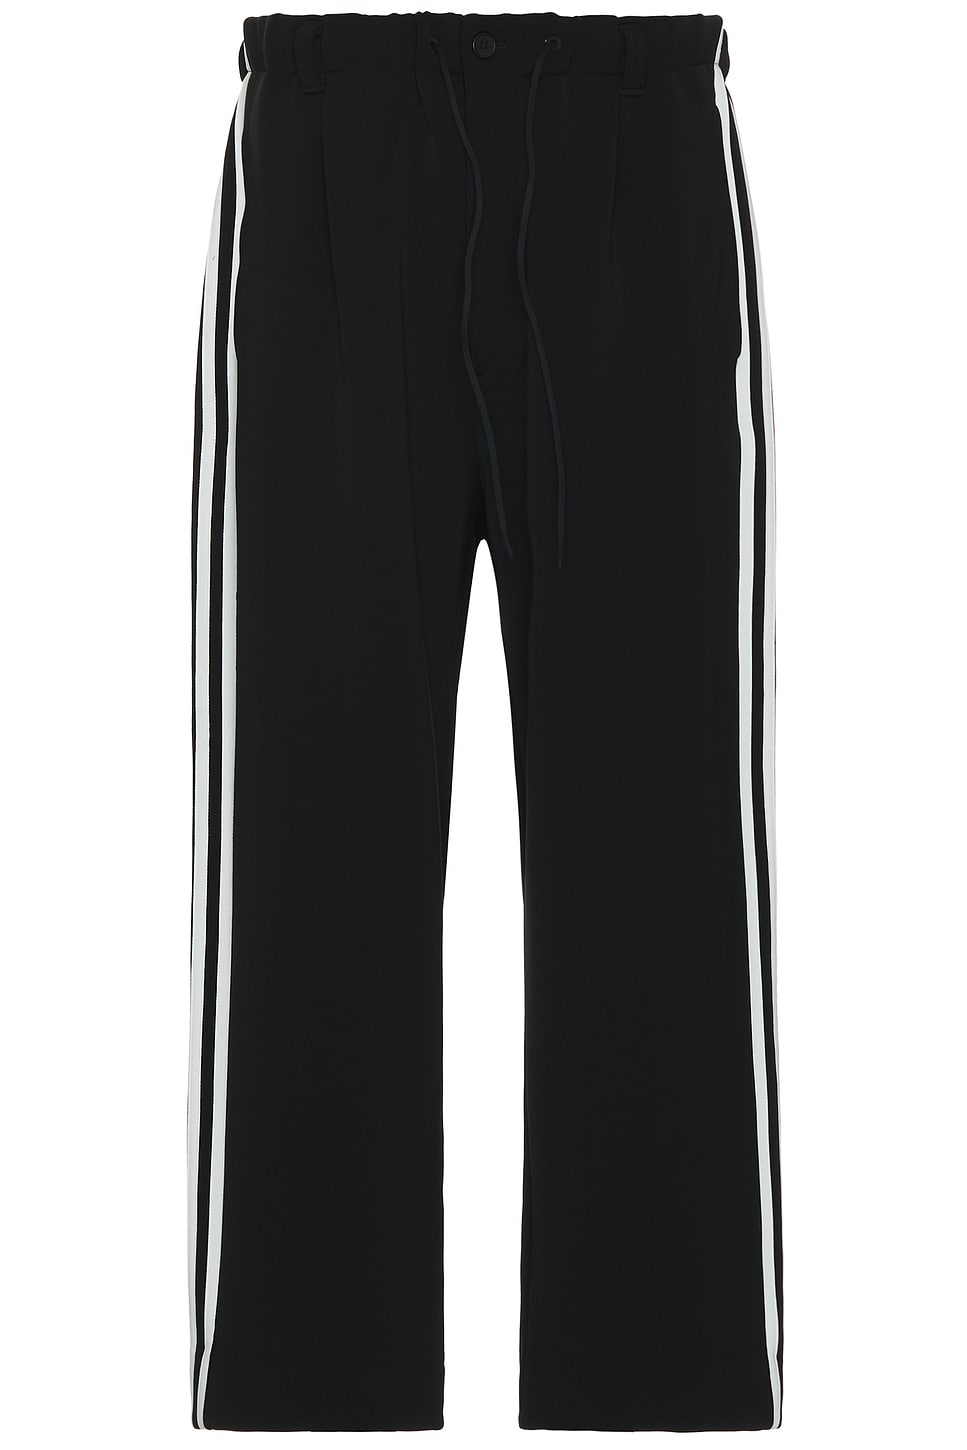 3s Straight Track Pant in Black